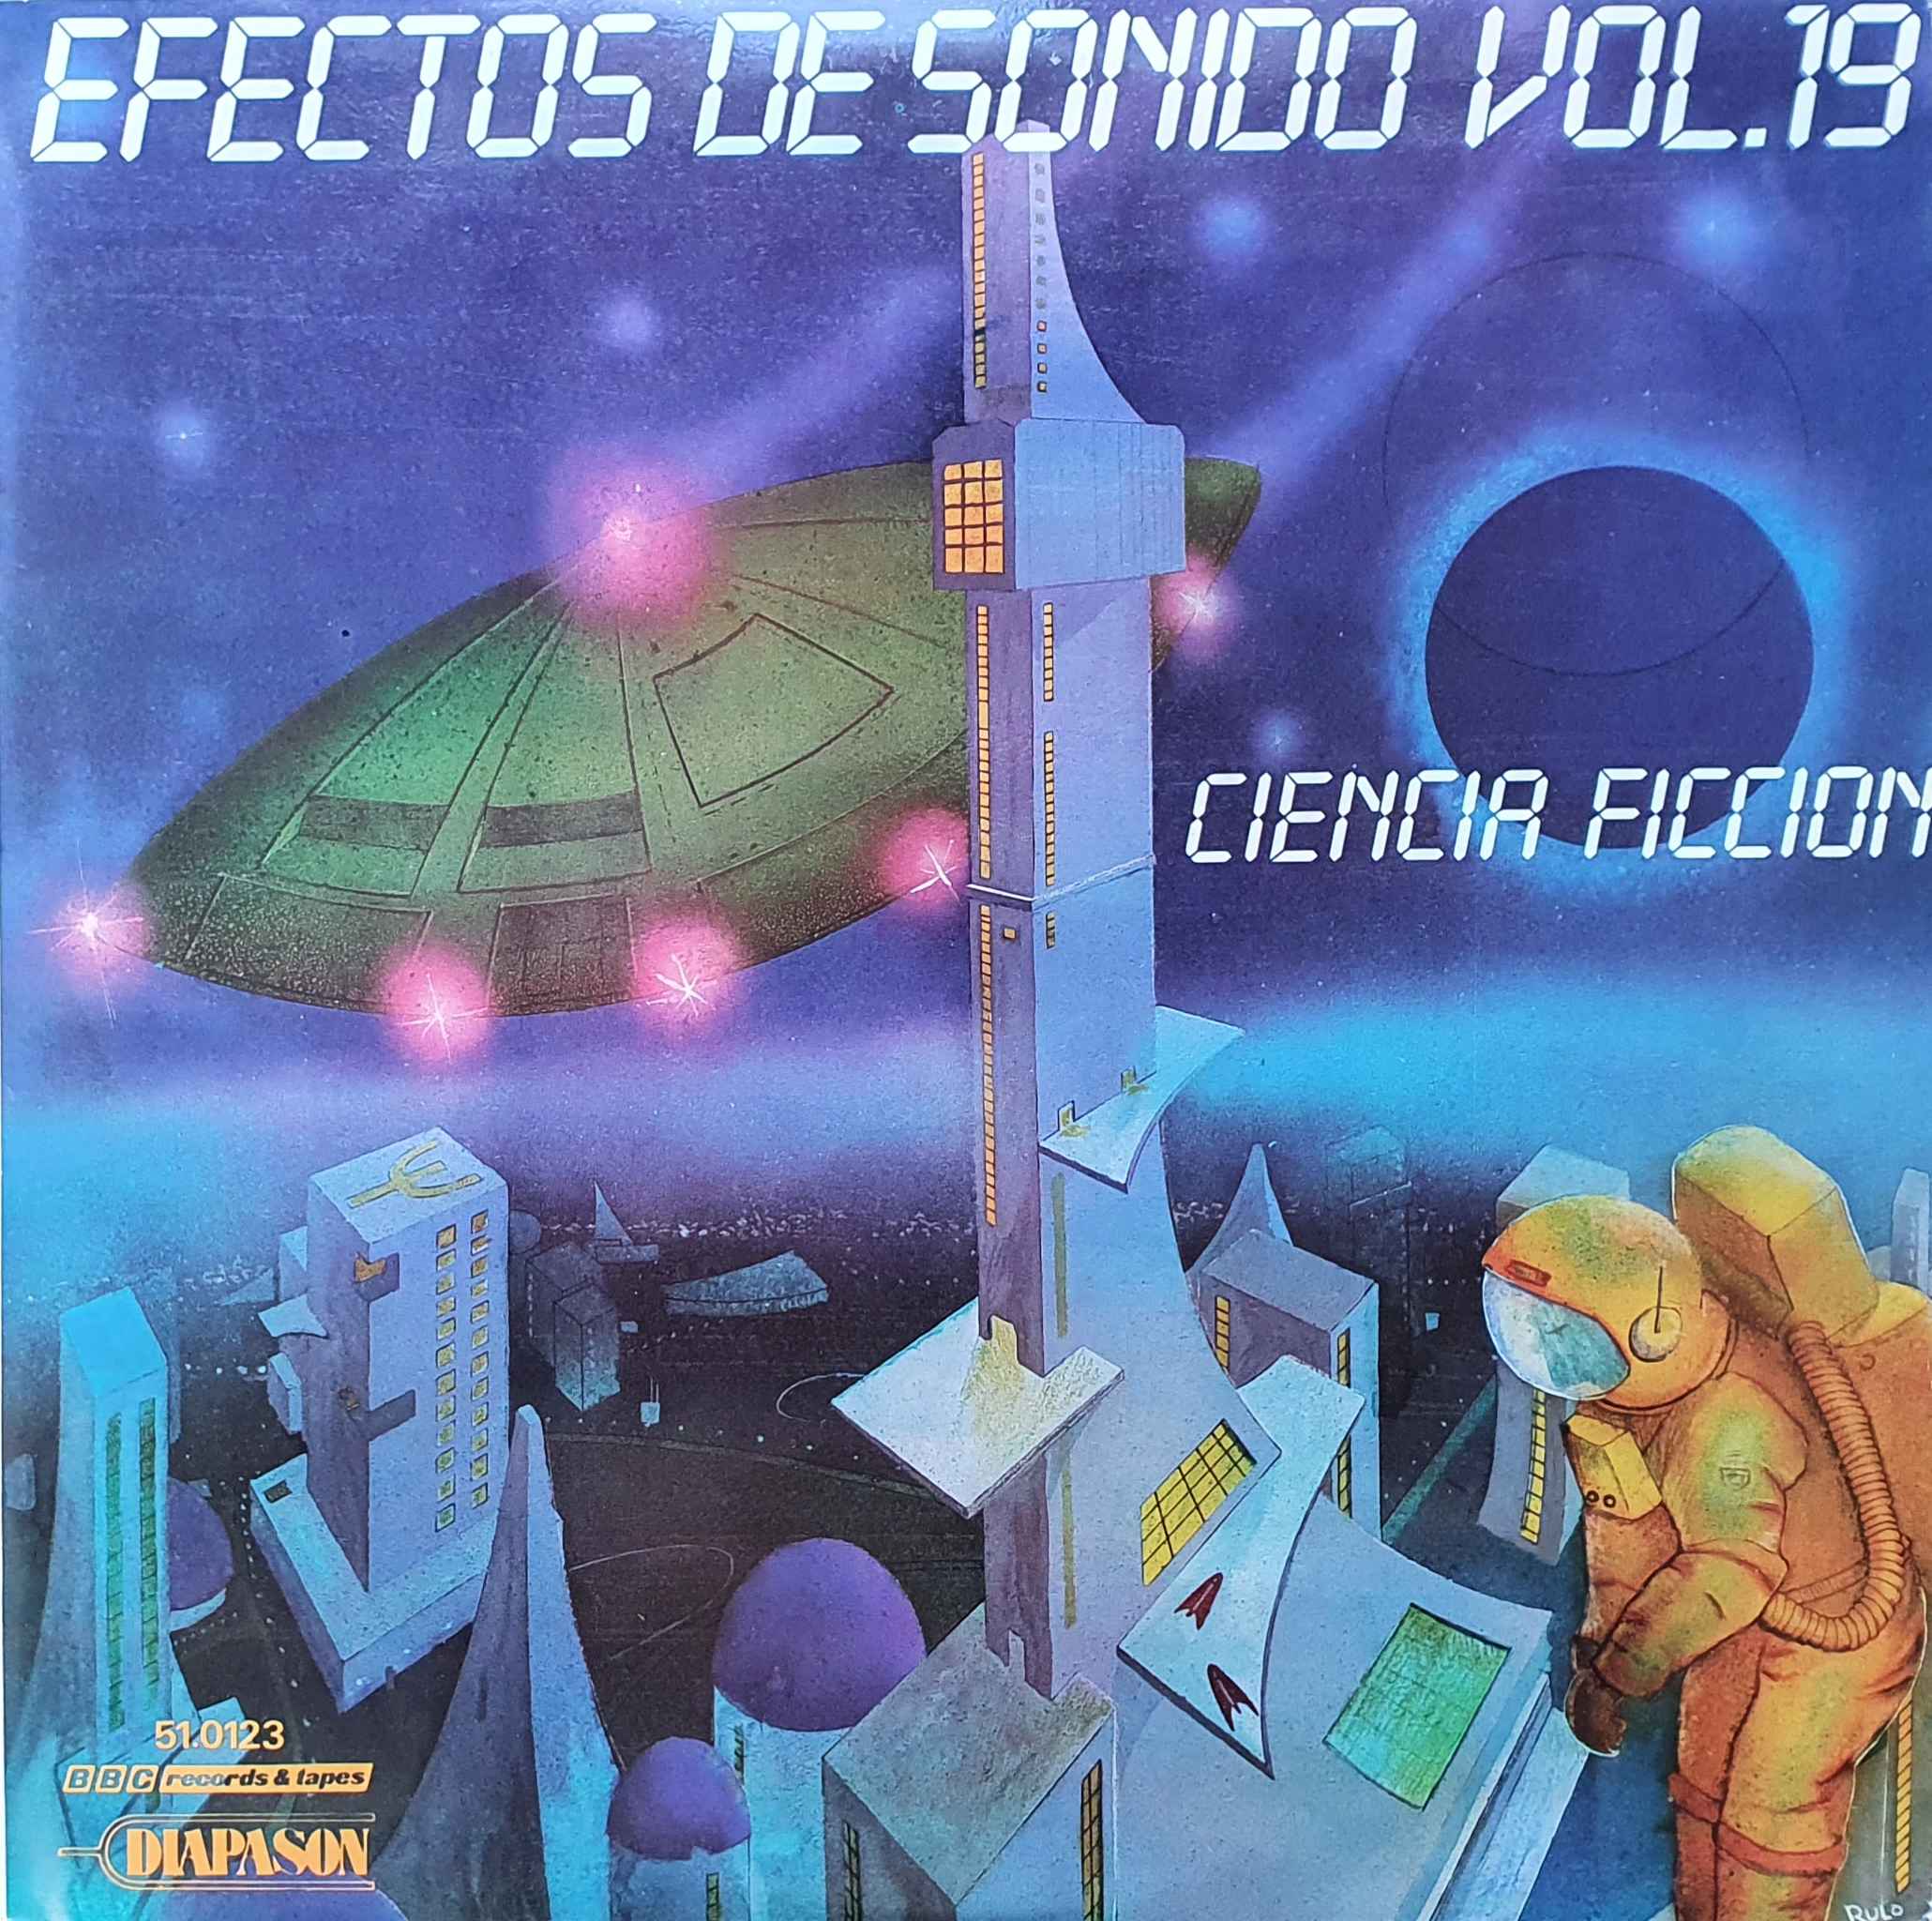 Picture of 51.0123 Efectos de sonido Vol. 19 - Ciencia Ficcion (Spanish import) by artist Dick Mills / Brian Hodgson from the BBC albums - Records and Tapes library